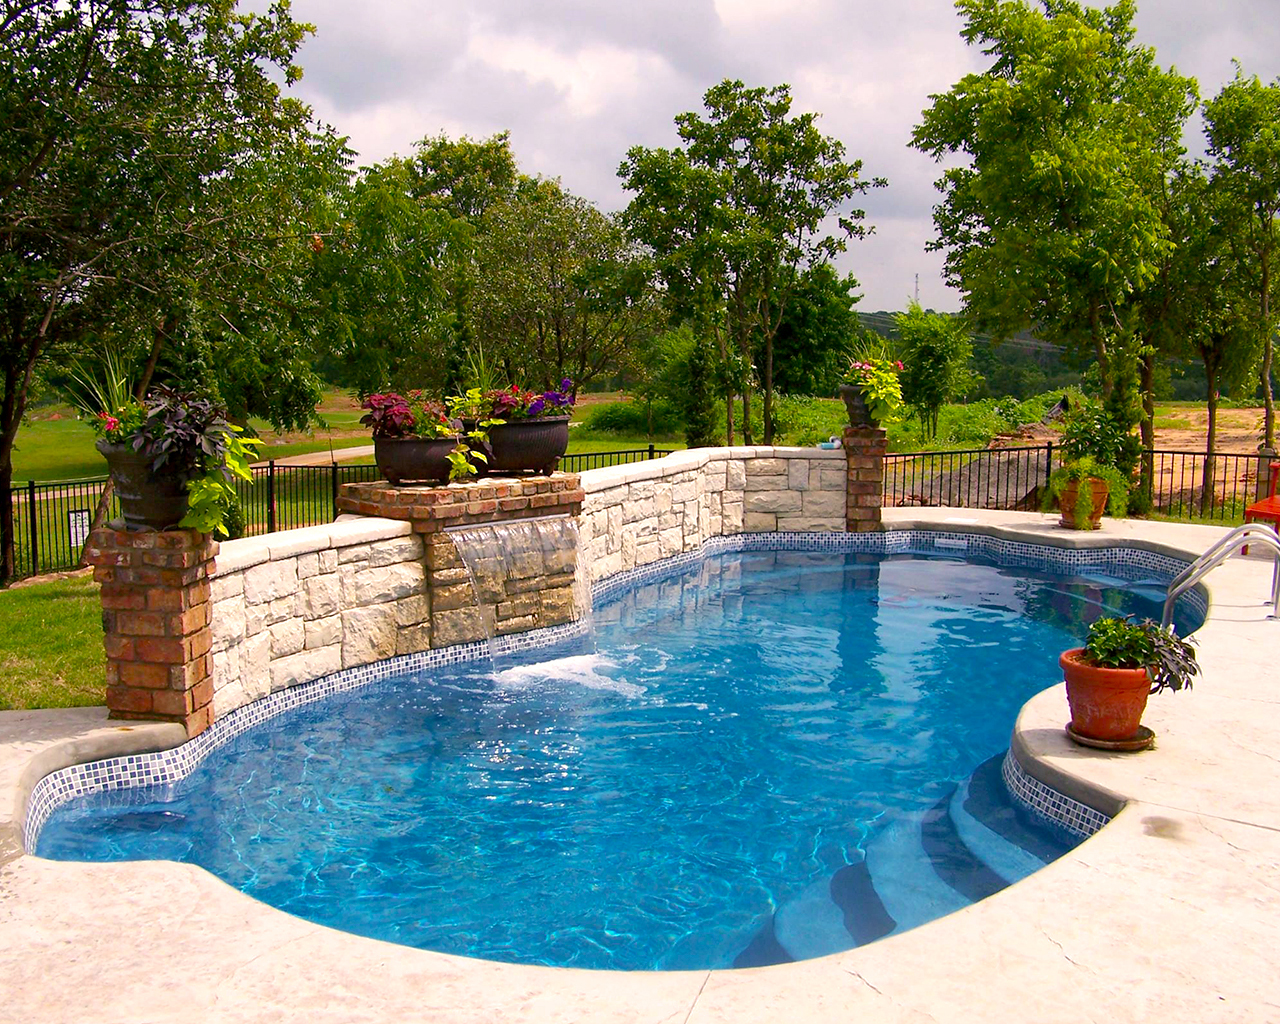 Fair Oaks Boerne Texas Fiberglass Pools by Lonestar Pool installs the Santa Fe model free form pool with entry steps, exit ladder and custom water features